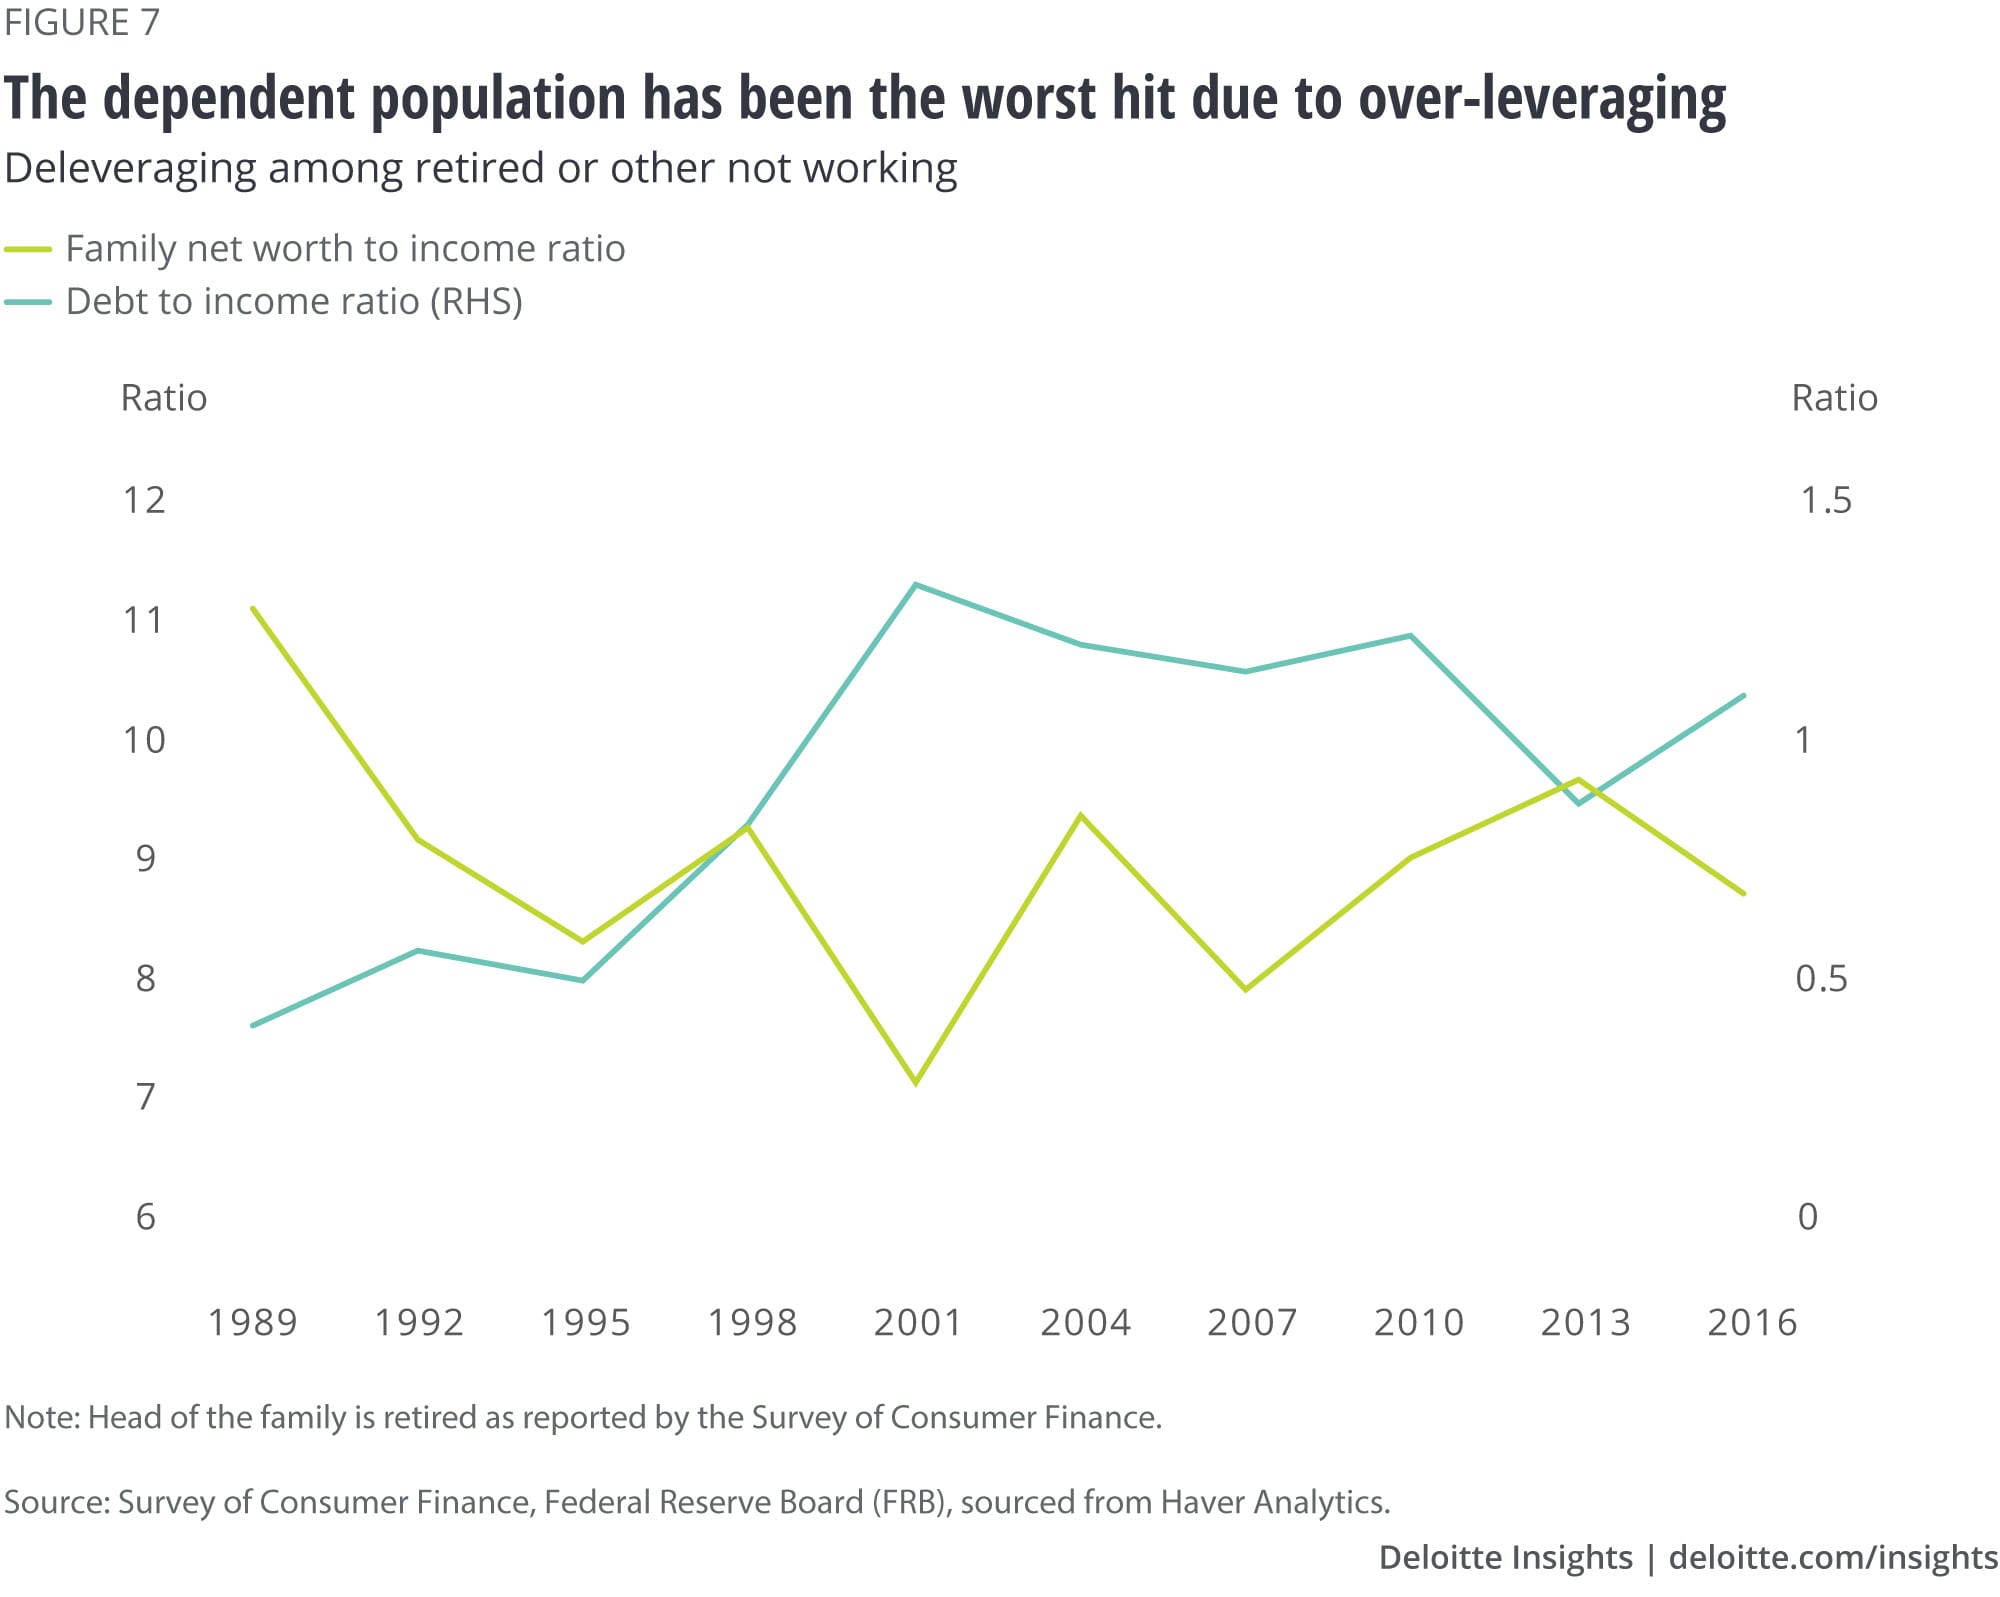 The dependent population has been the worst hit due to over-leveraging